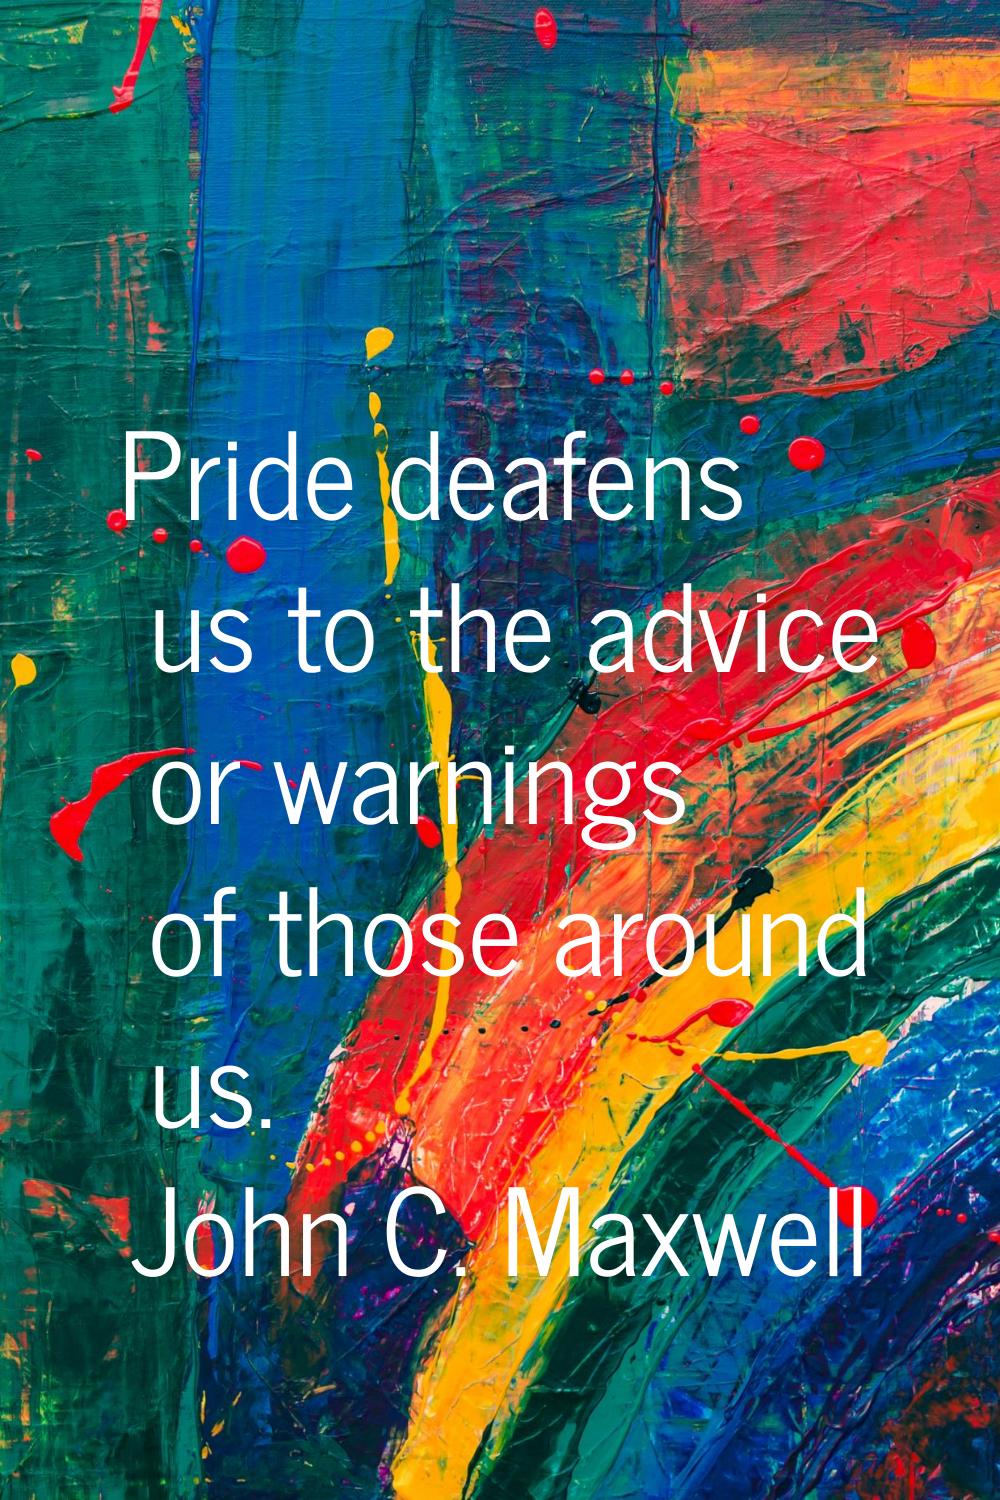 Pride deafens us to the advice or warnings of those around us.